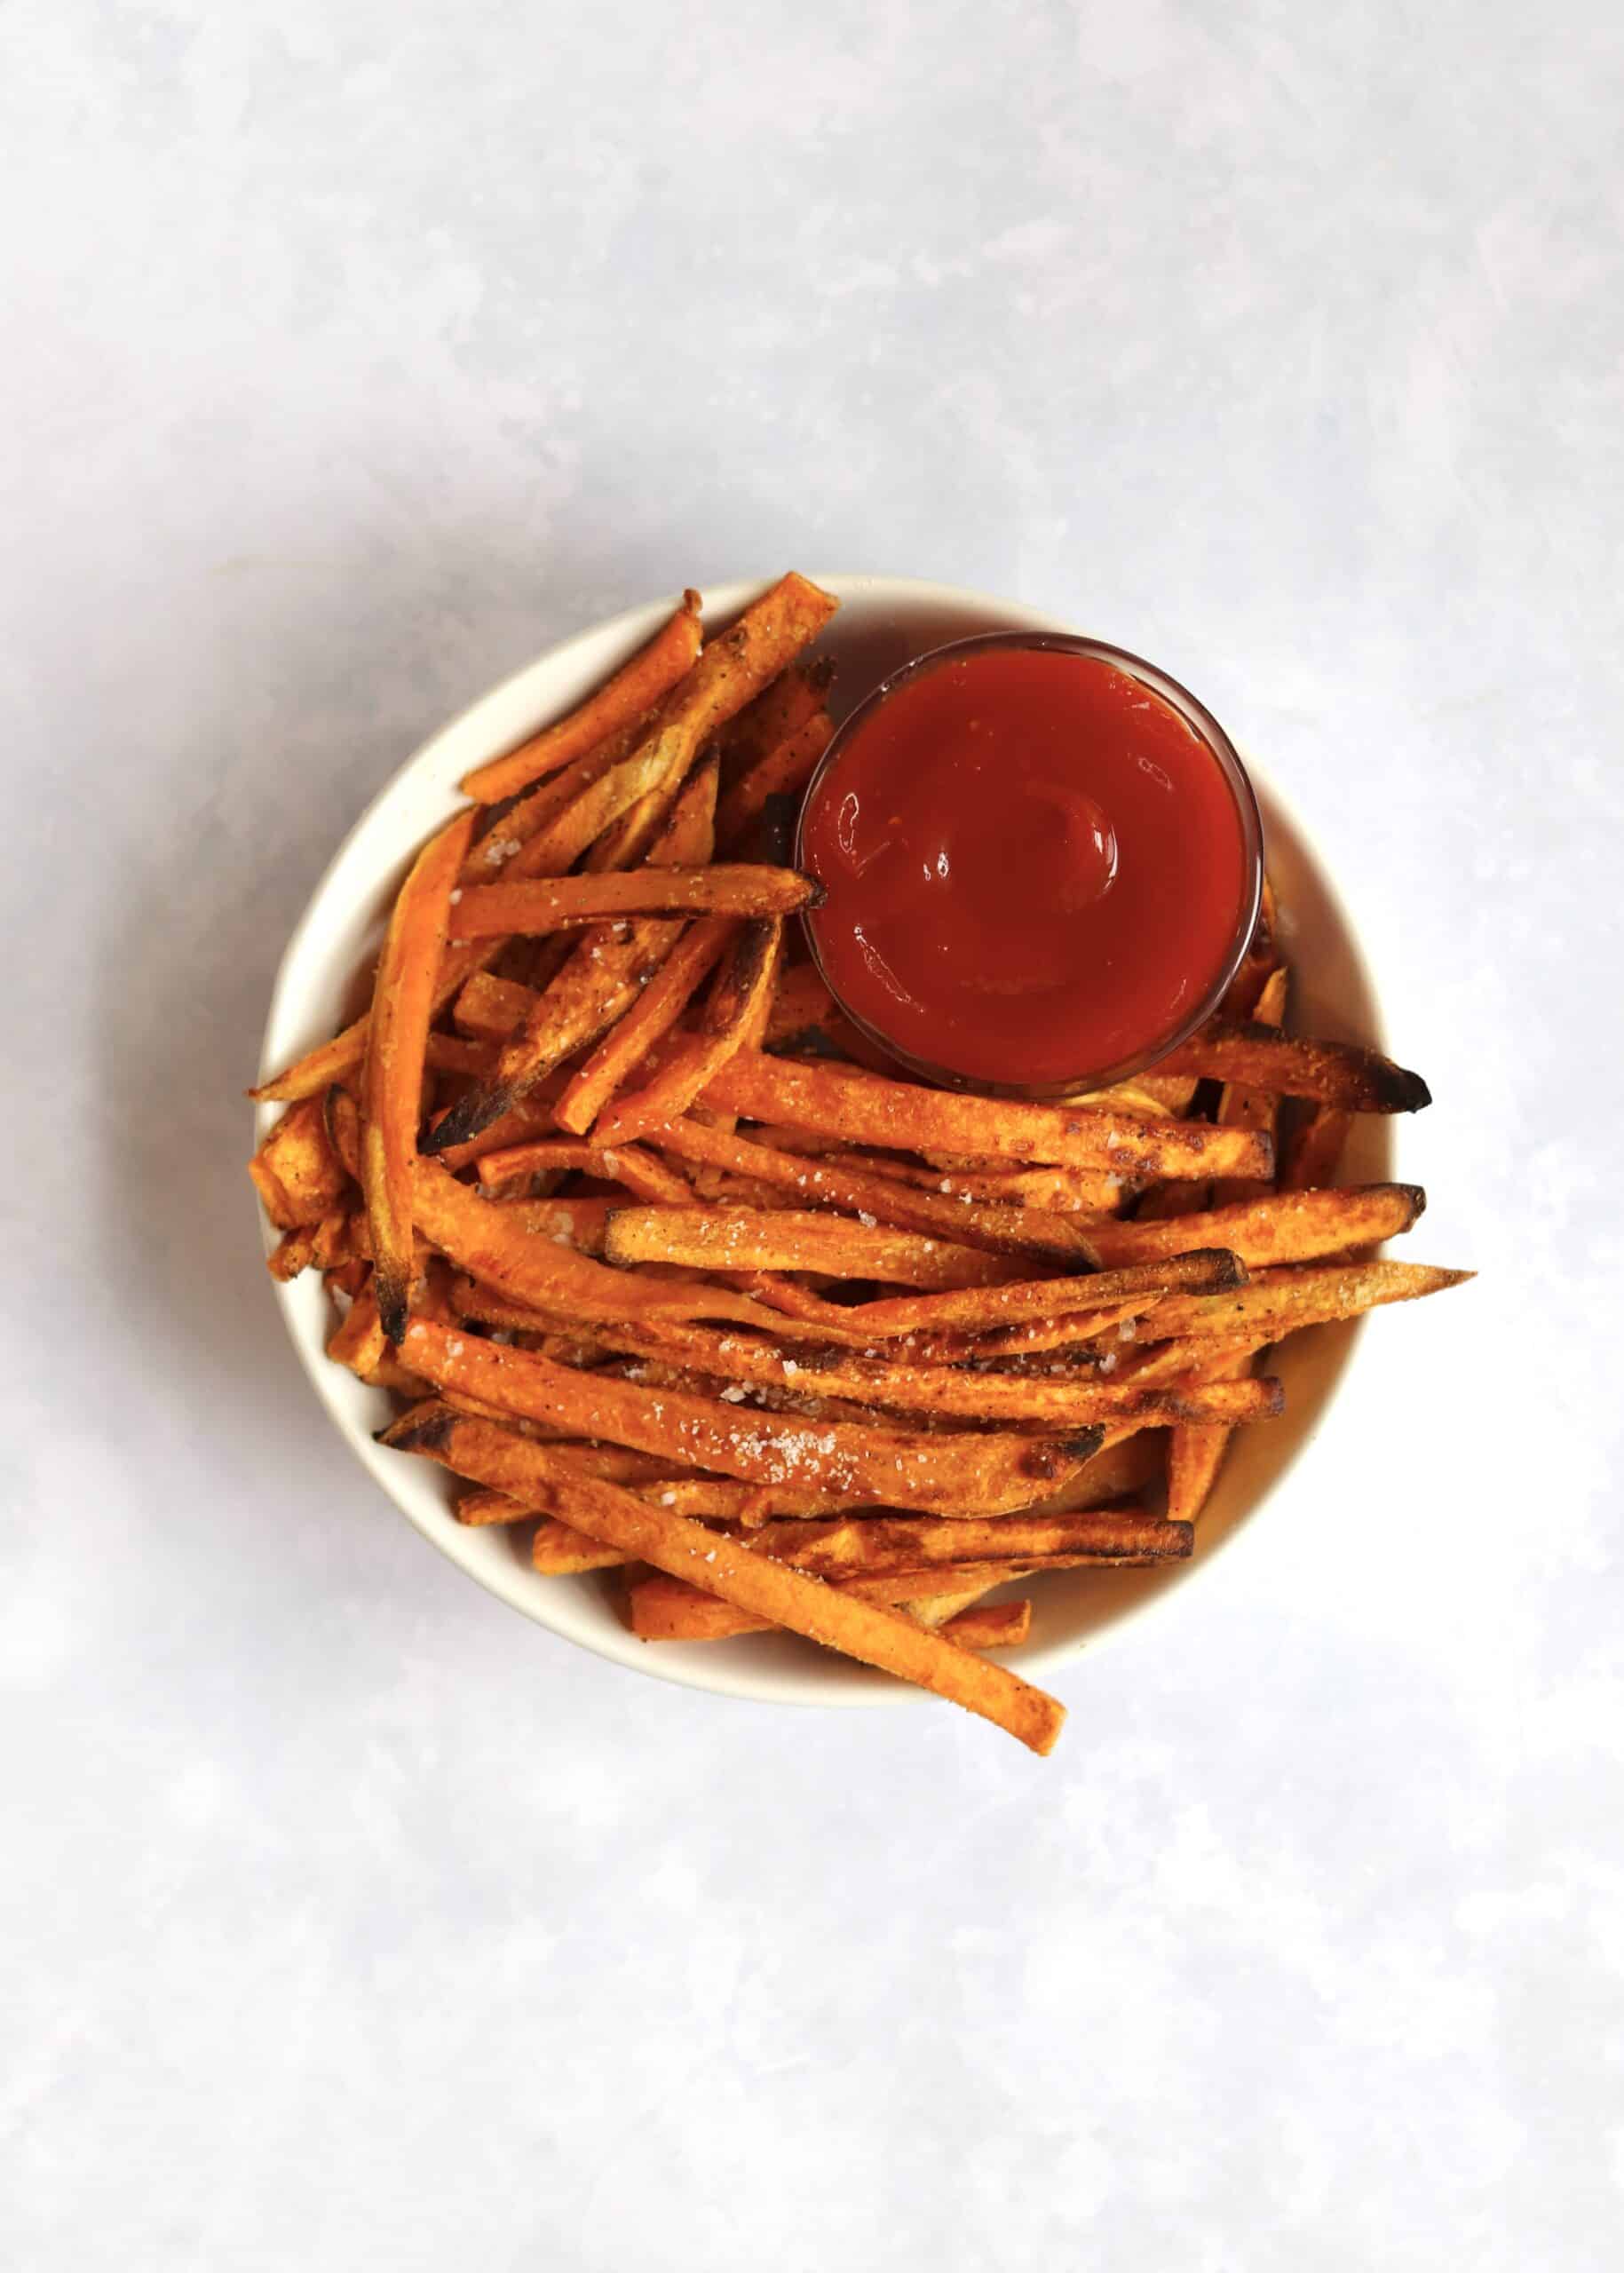 Bowl of sweet potato fries with ketchup